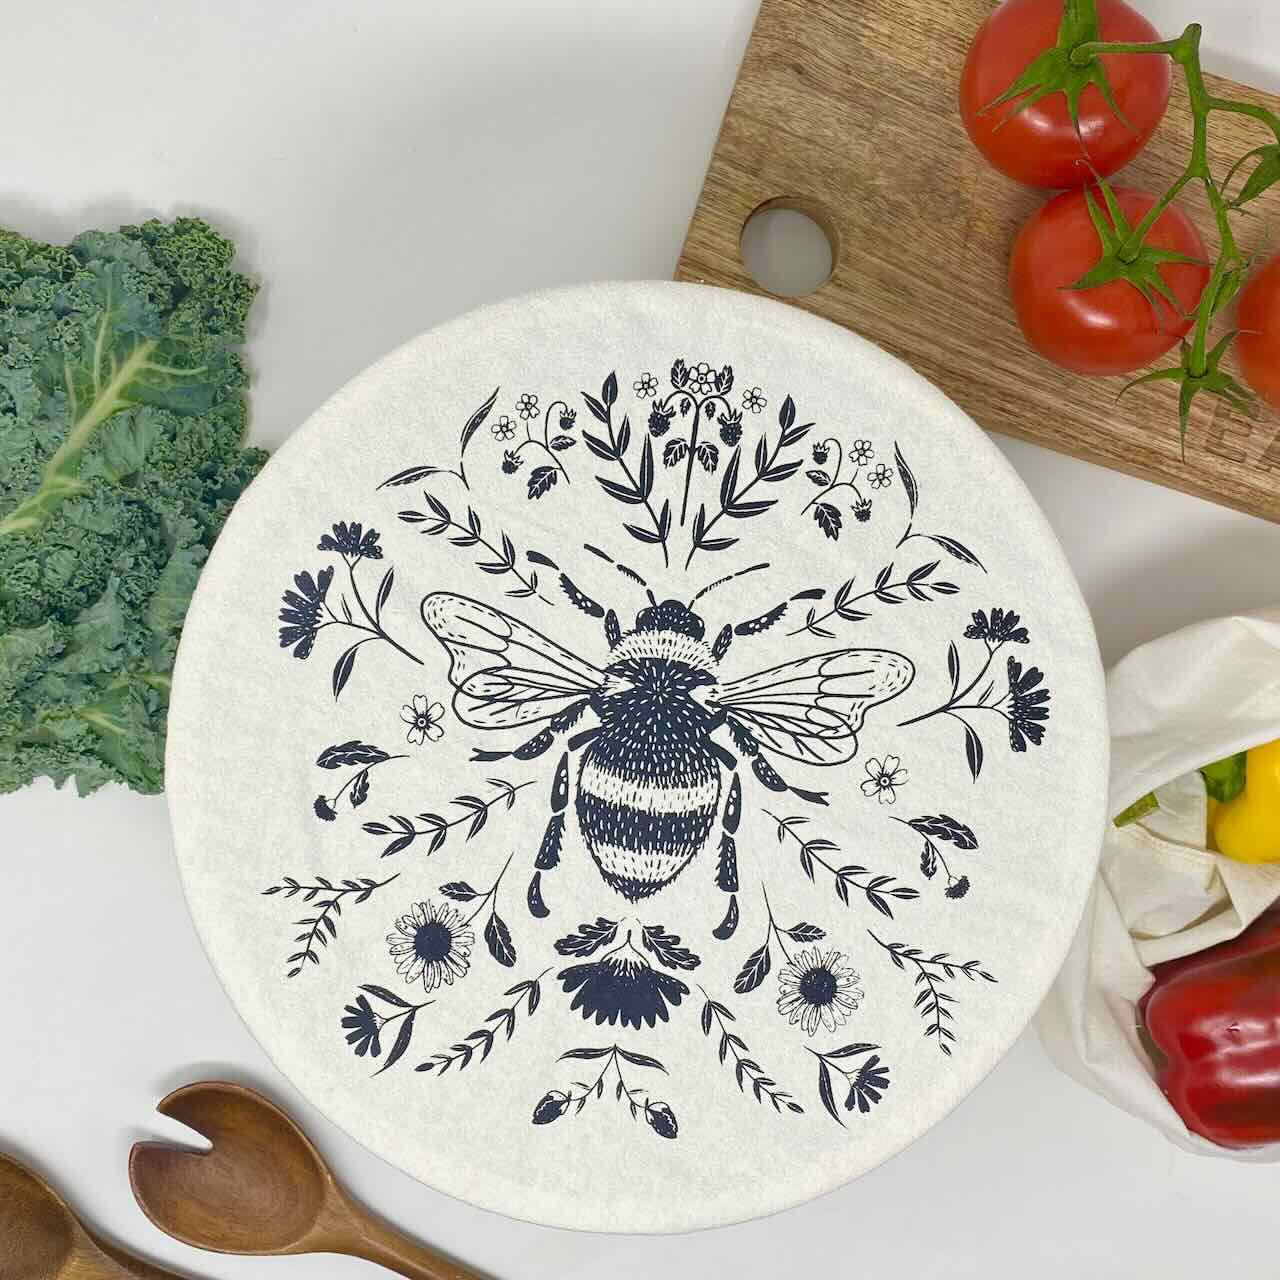 Flat lay of a large bowl covered by a cotton charcoal bee patterned bowl cover on a wooden chopping board, surrounded by vegetables such as red tomatoes, kale and peppers.